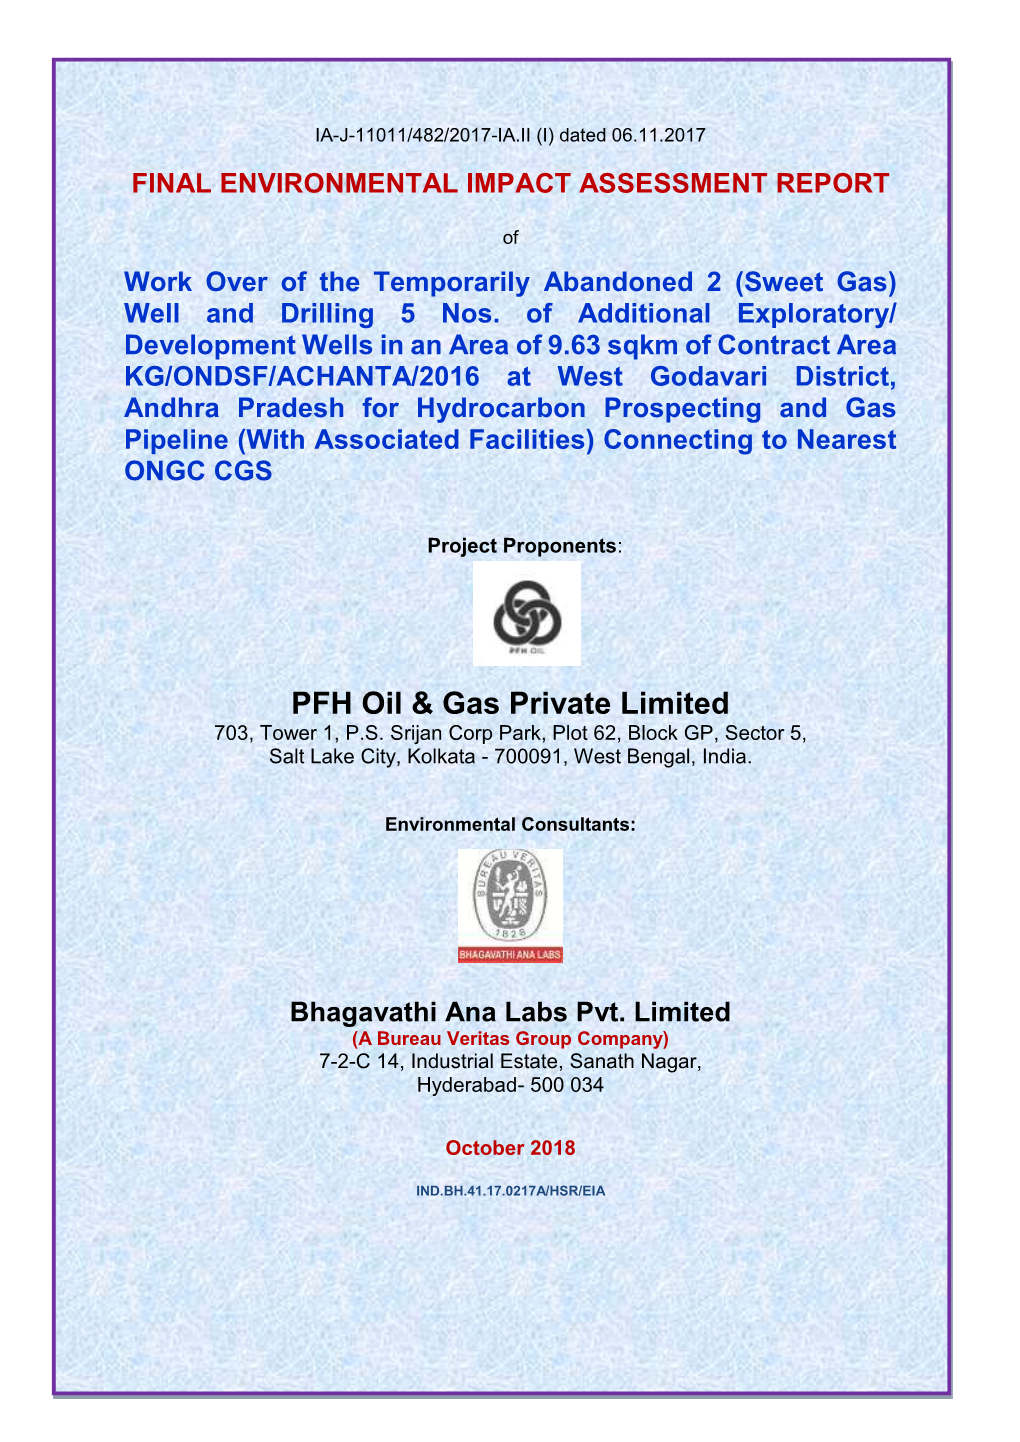 PFH Oil & Gas Private Limited